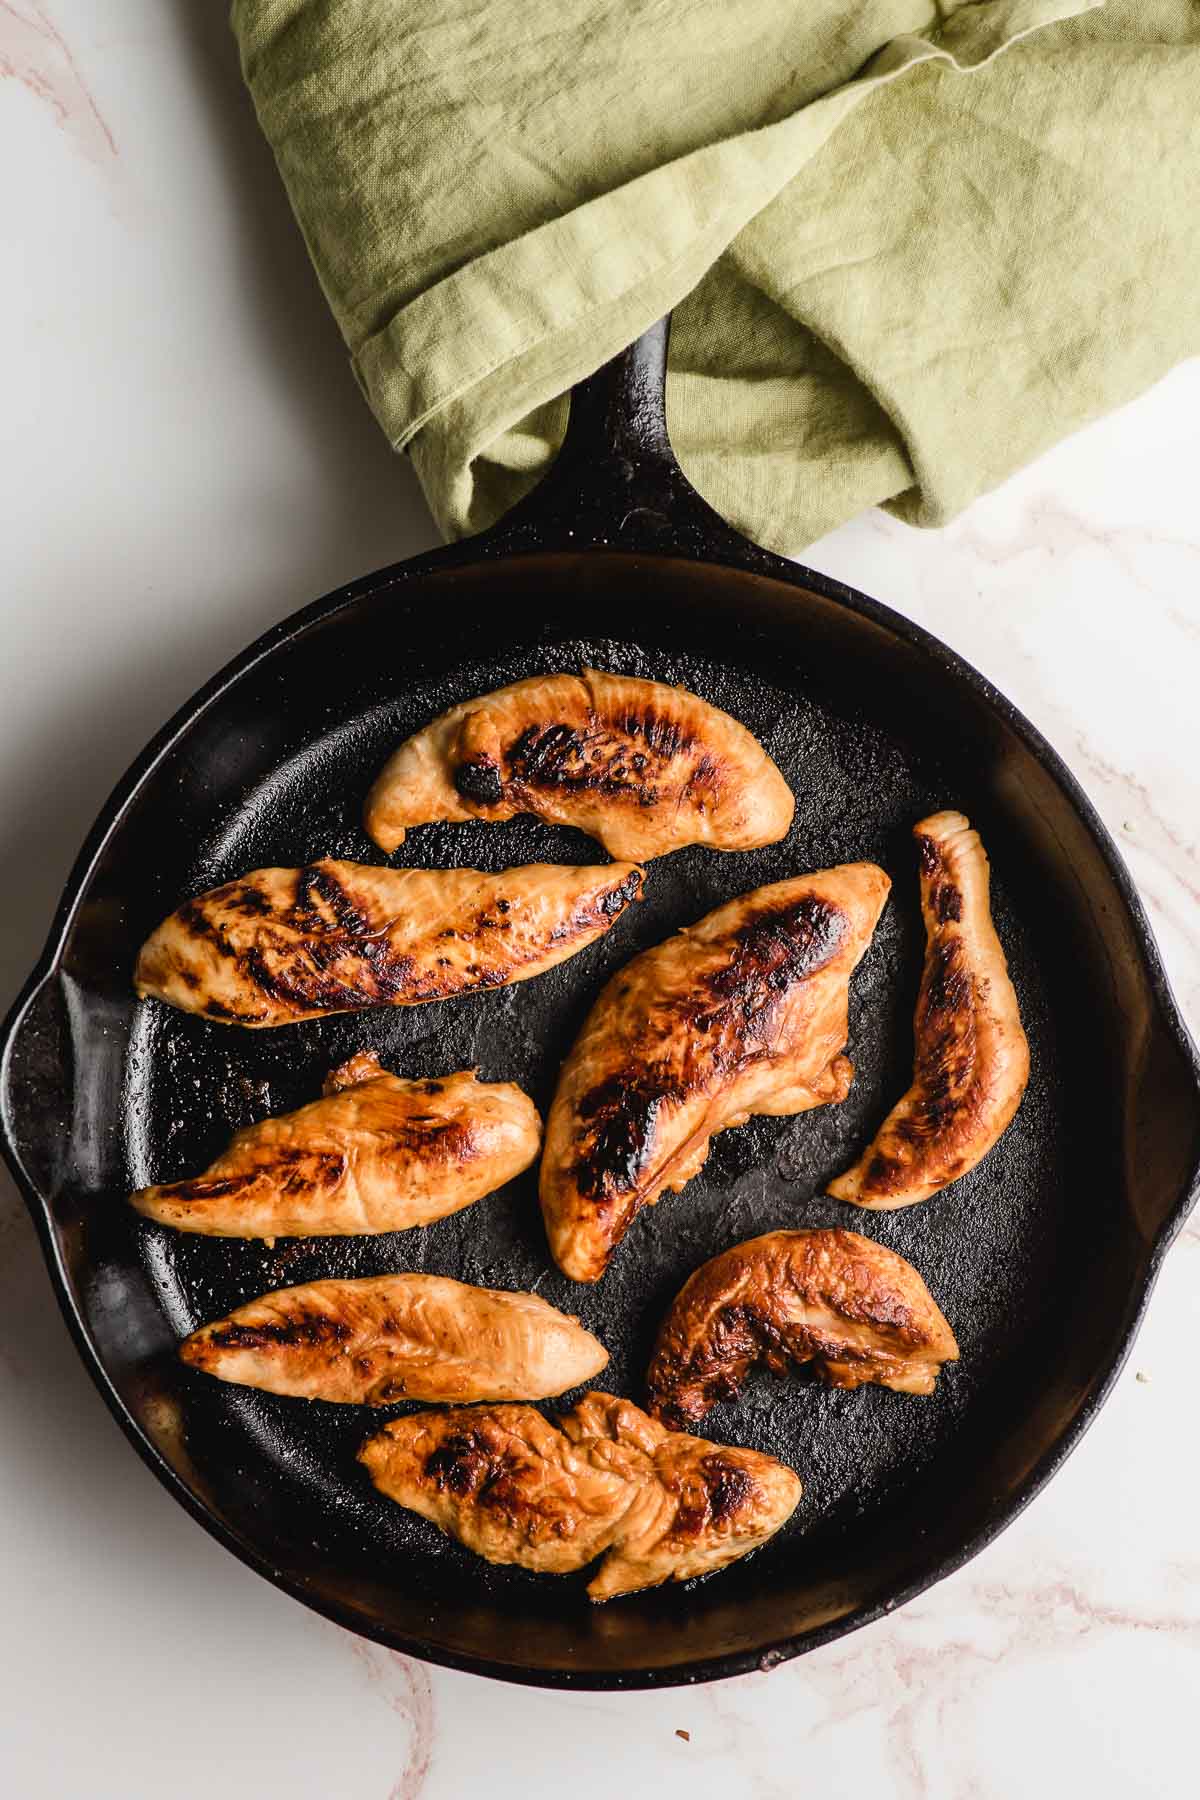 Chicken breast tenderloins shown cooked in a cast iron skillet.